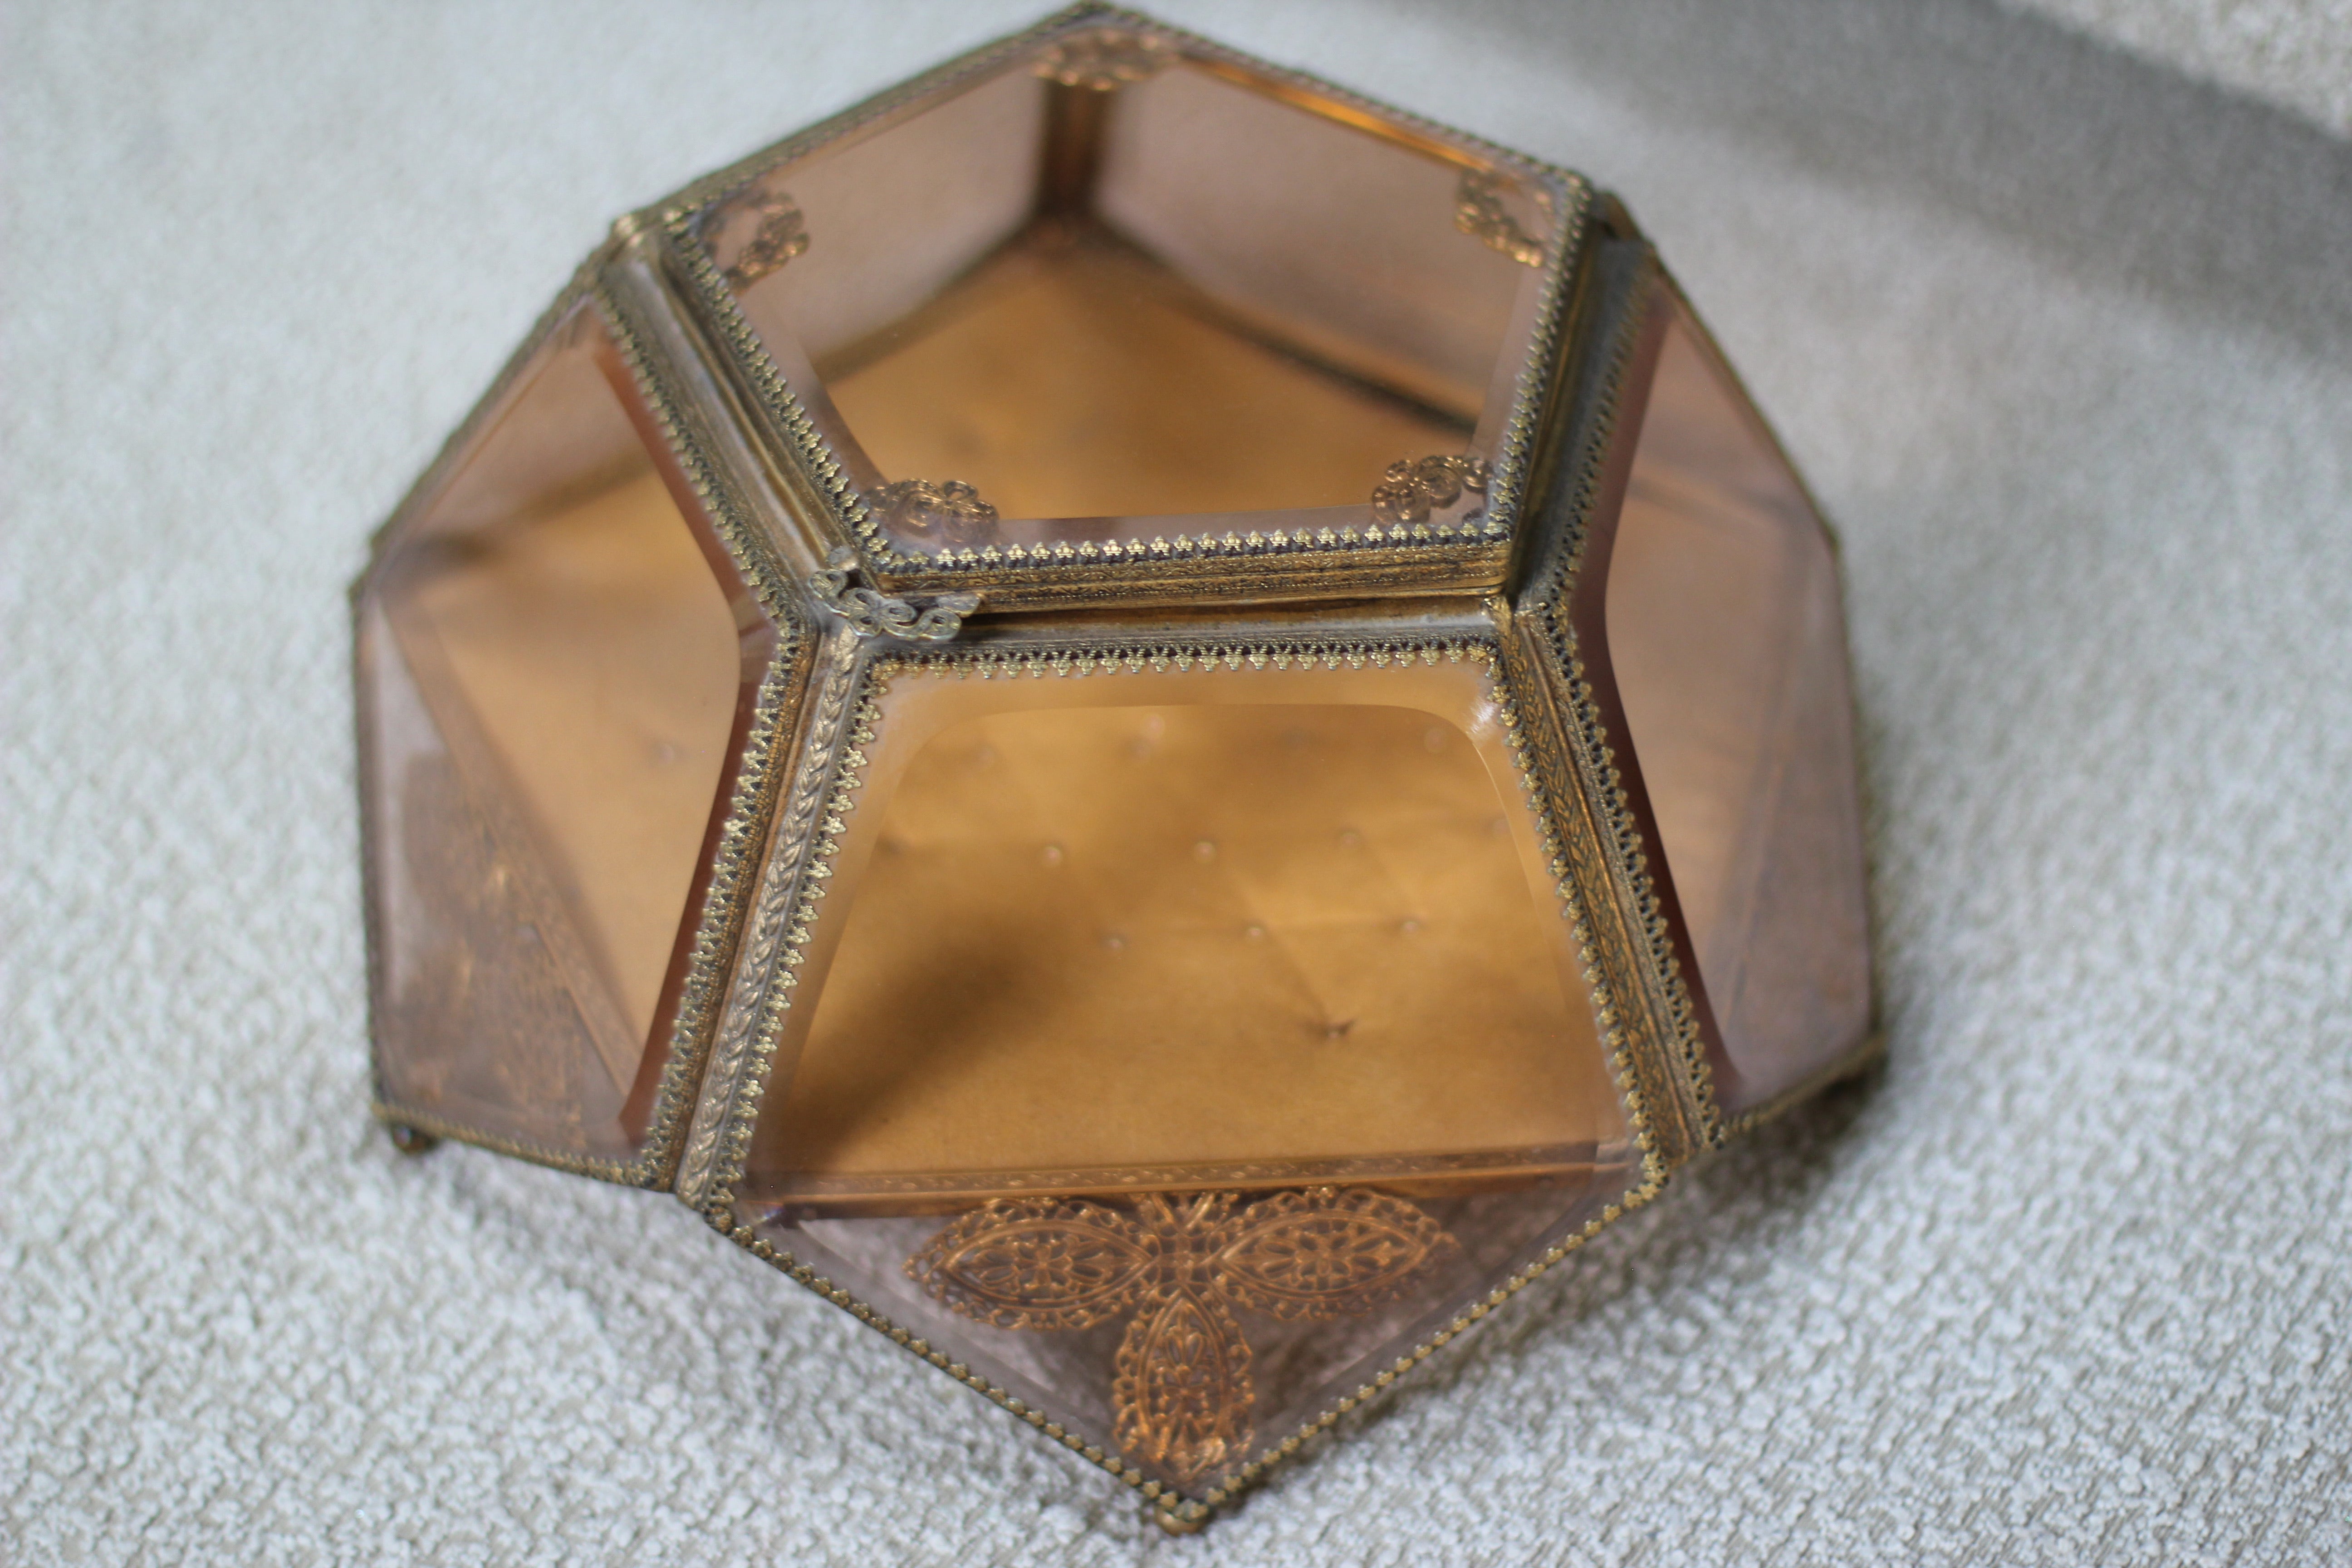 Antique Amber Tinted French Victorian Rare Jewelry Box